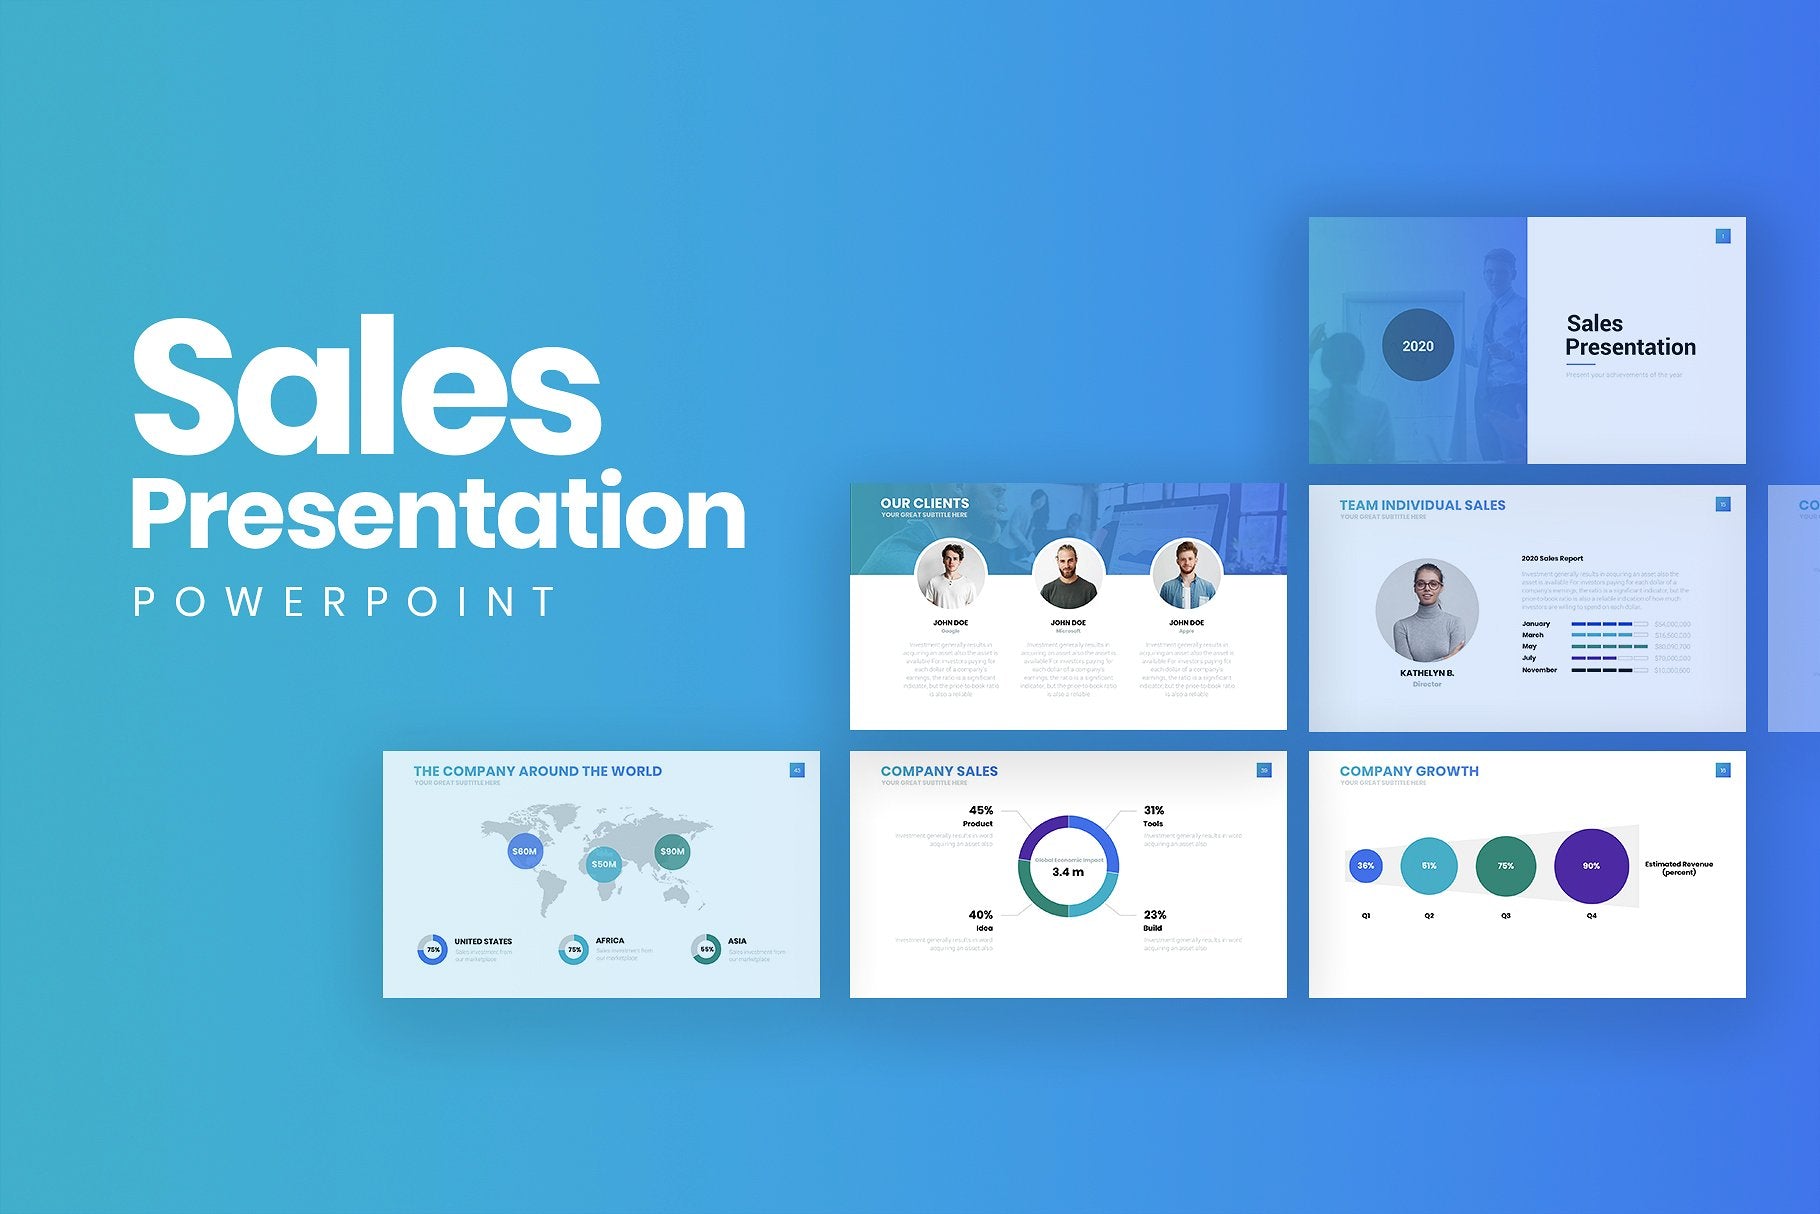 Sales Powerpoint Template 1 ?v=1543932788